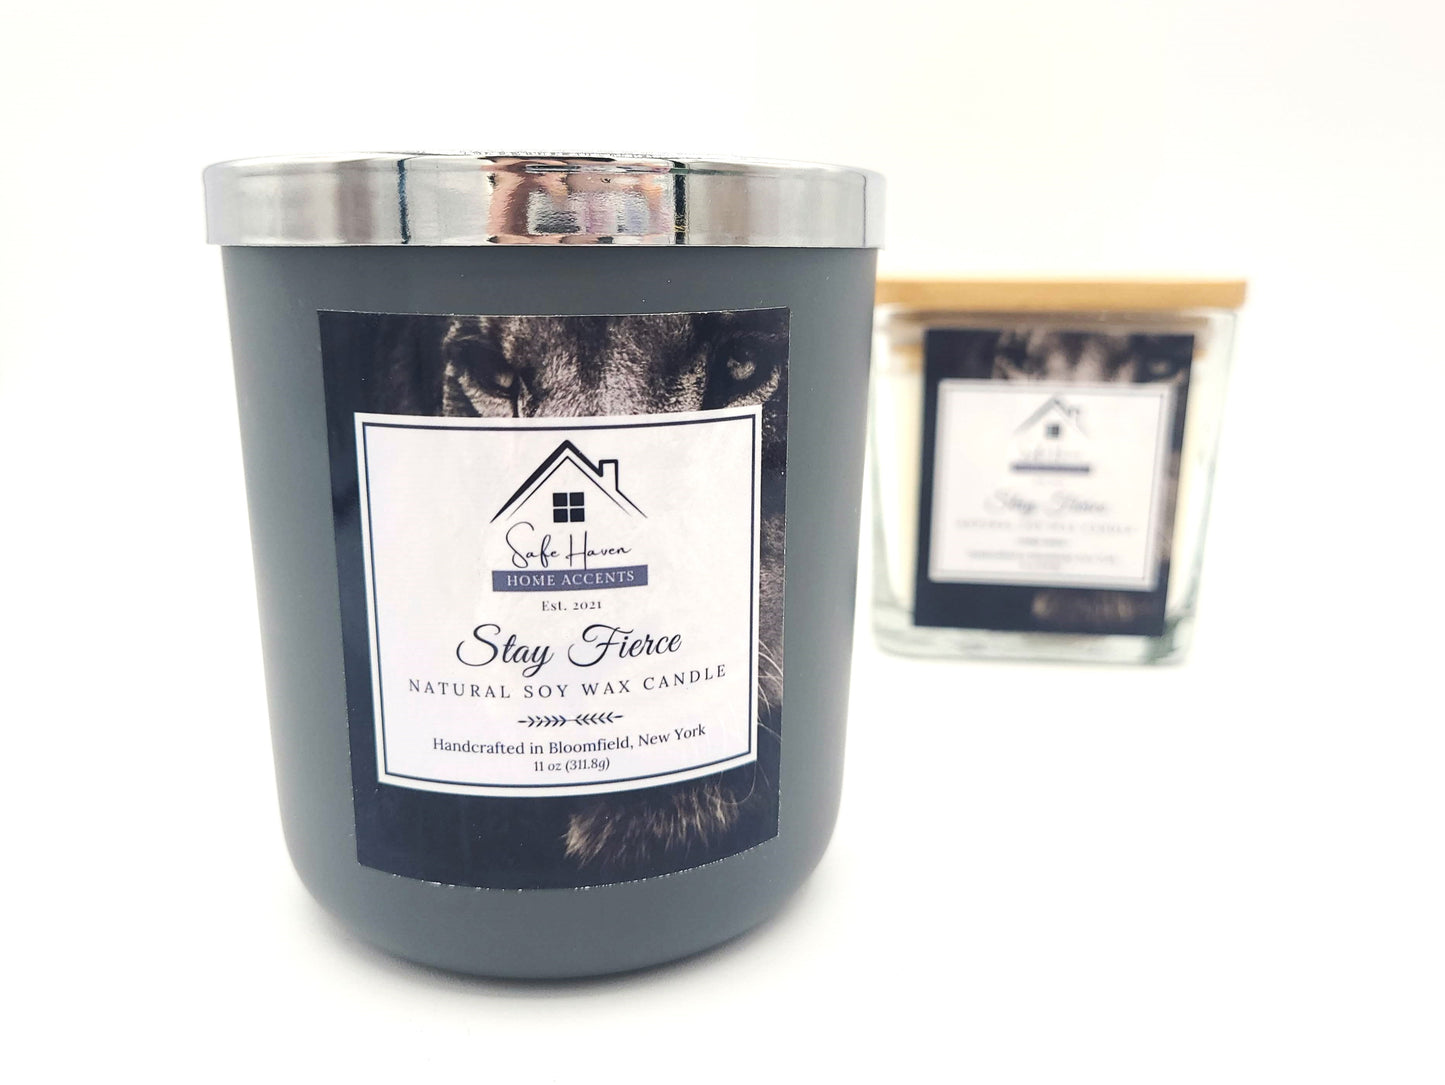 Stay Fierce Natural Soy Wax Candle